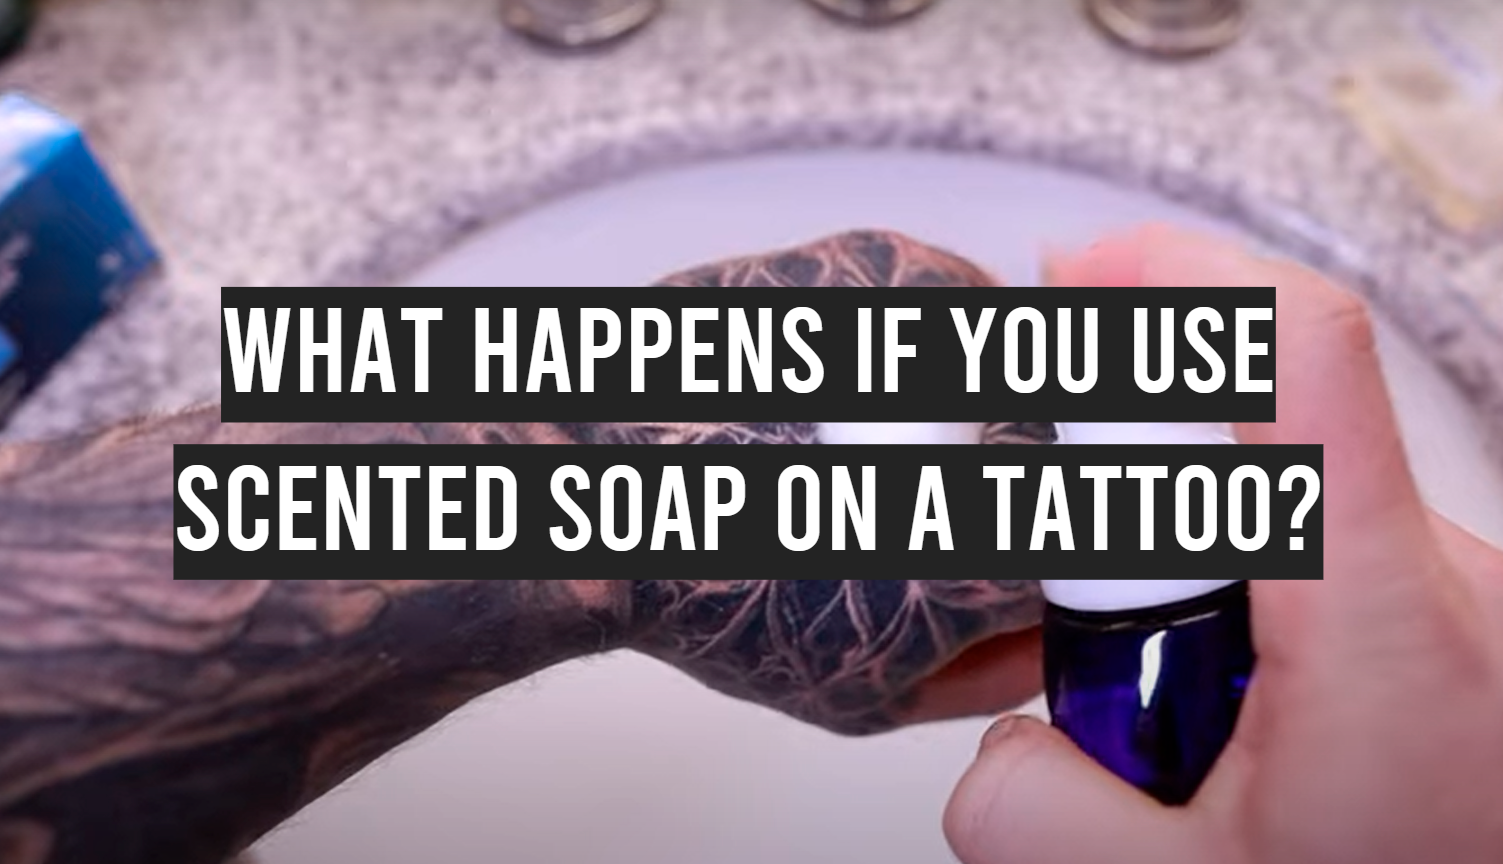 Why is fragrance bad for tattoos